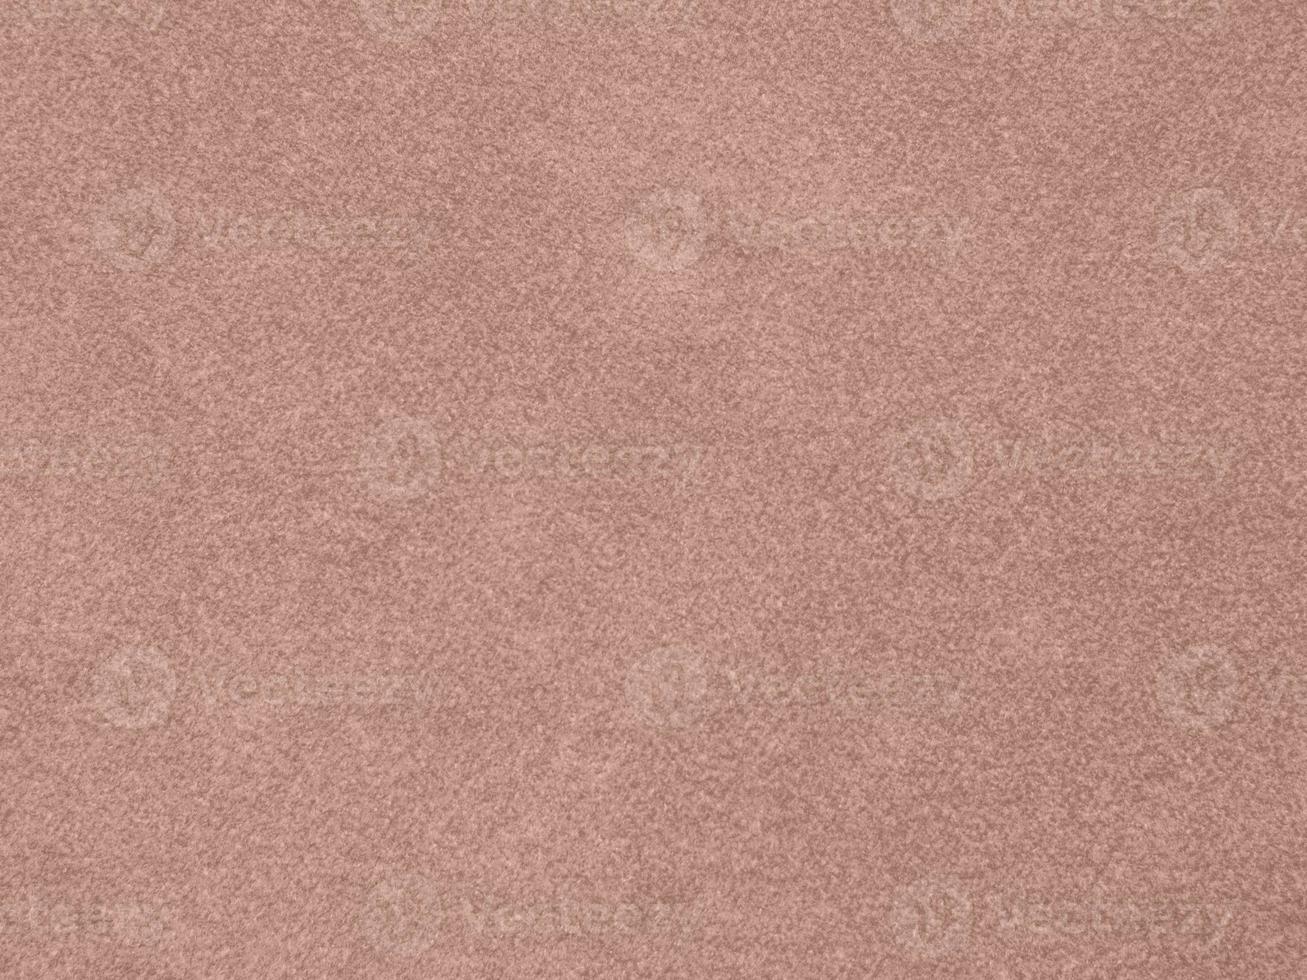 rose gold color velvet fabric texture used as background. Empty pink gold fabric background of soft and smooth textile material. There is space for text. photo